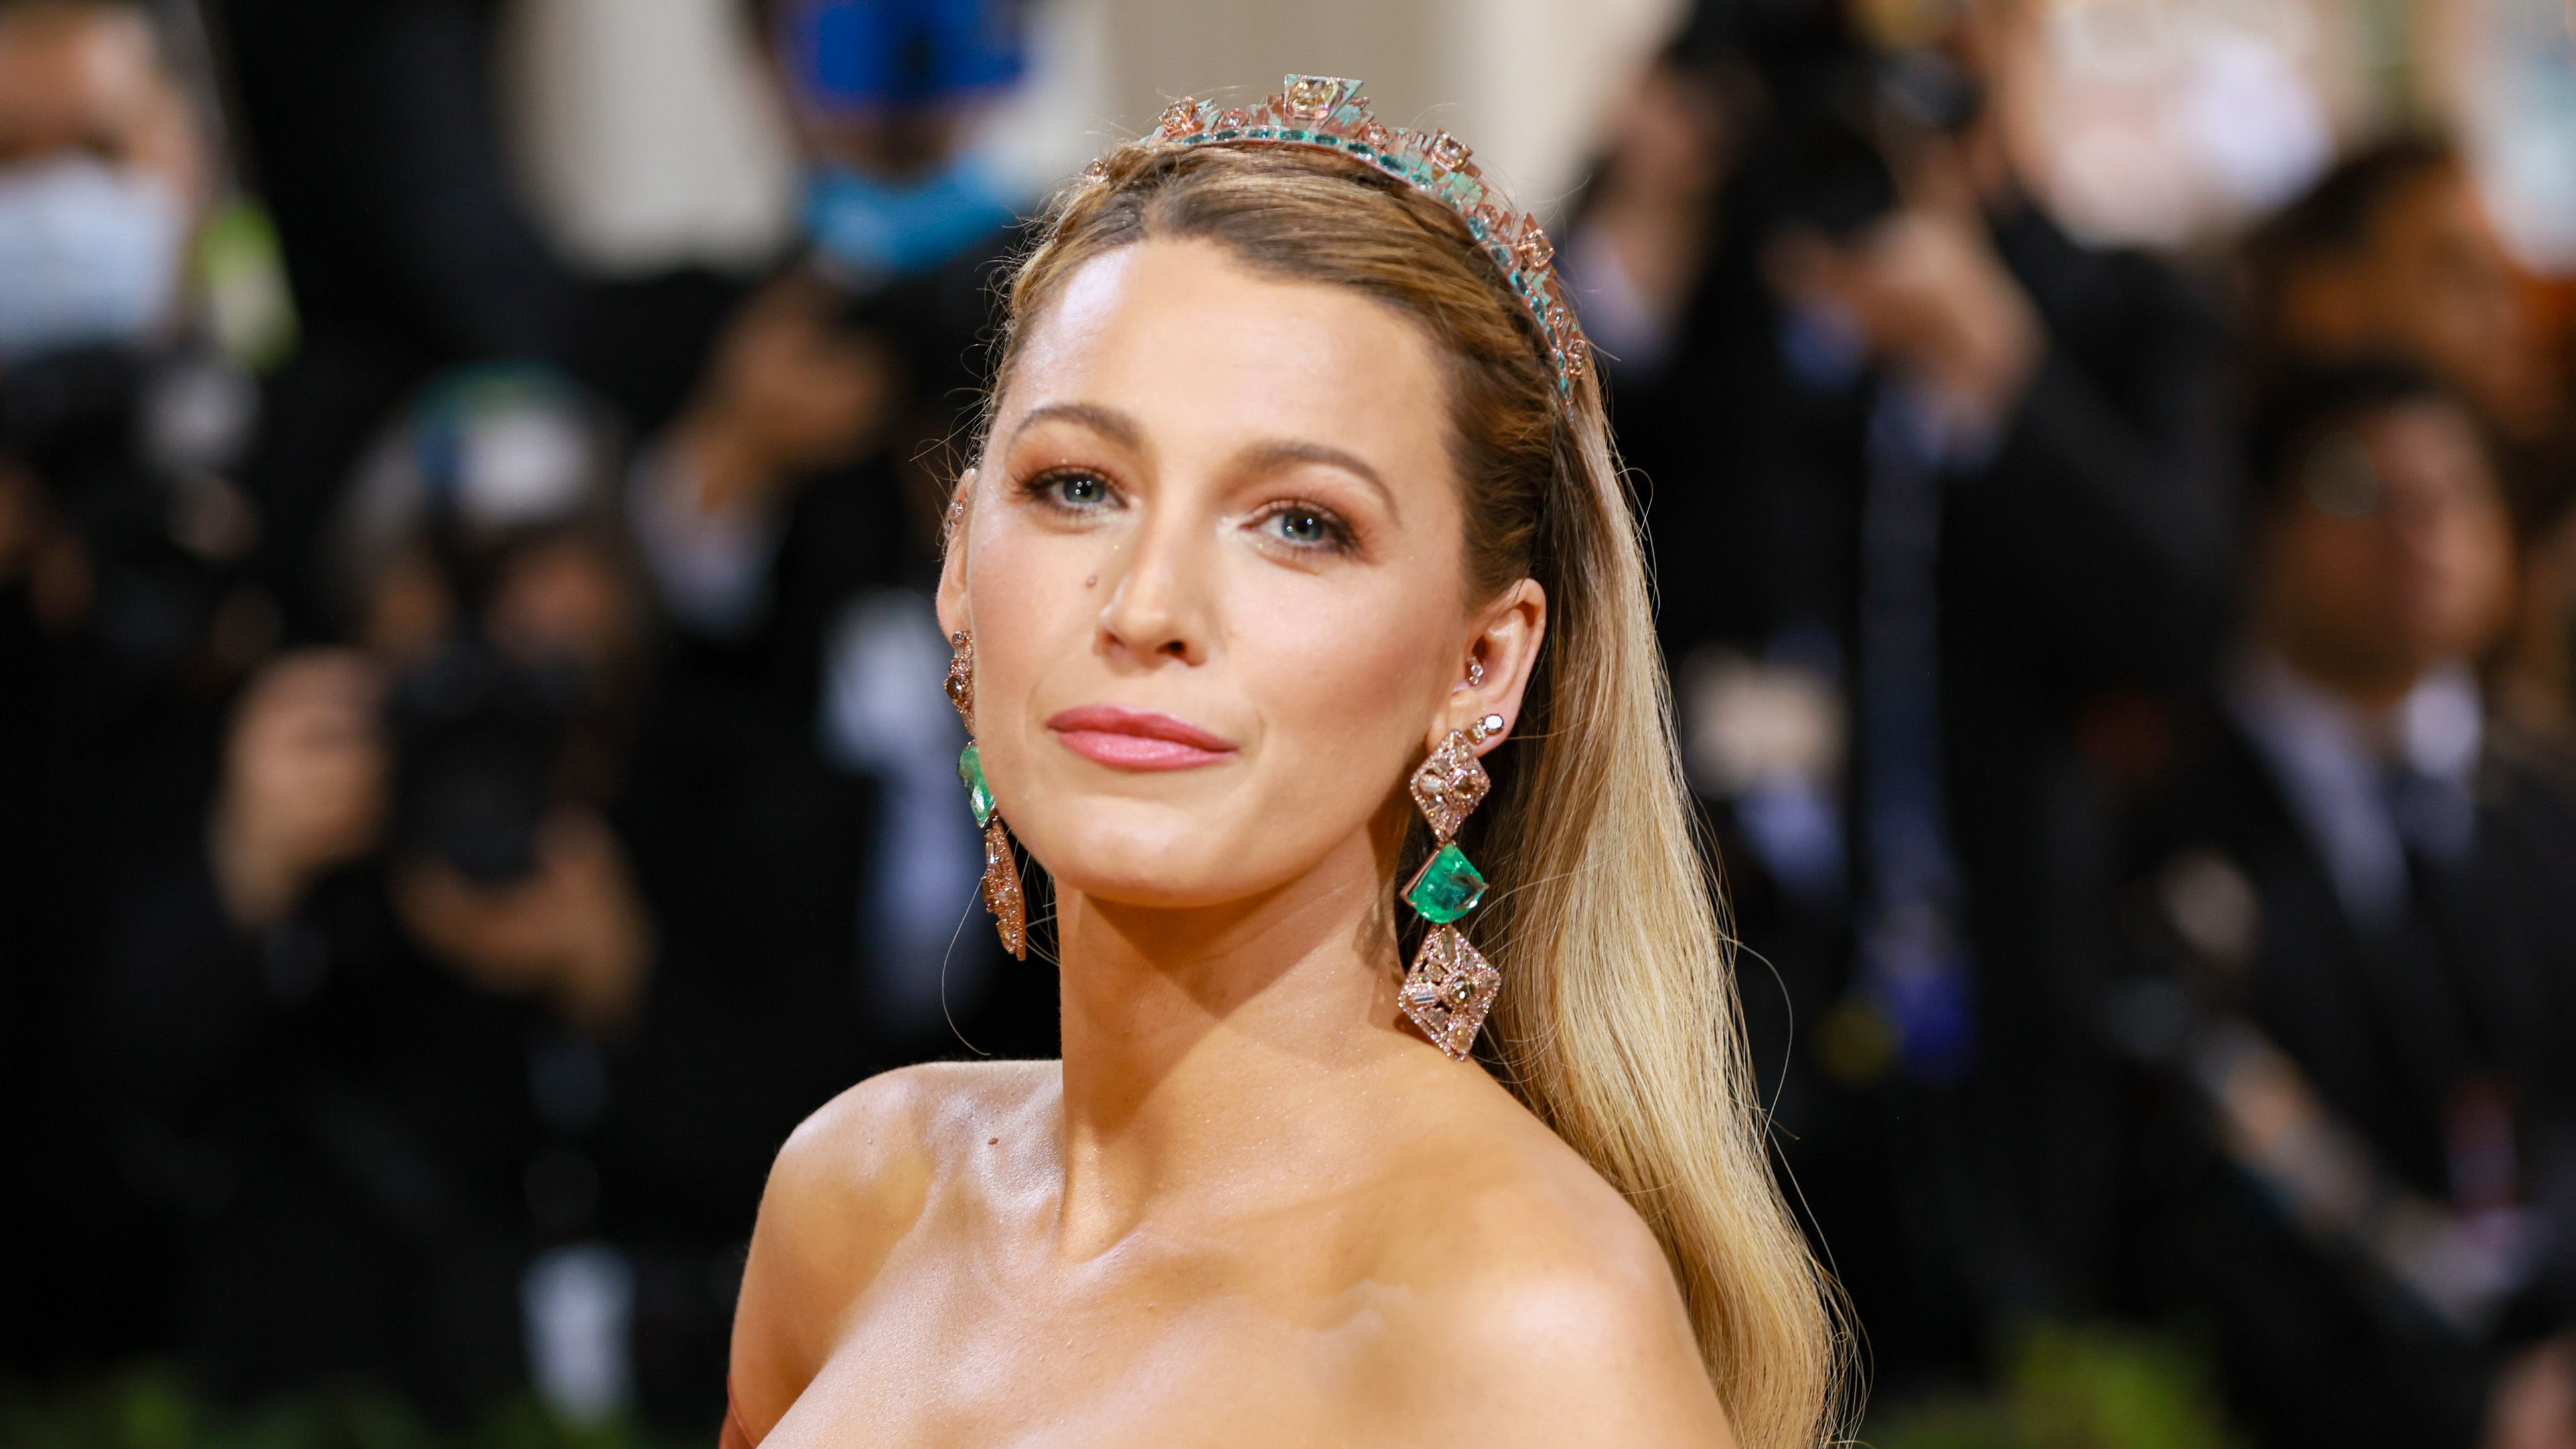 Blake Lively found the coolest outfit to work out in, and we're